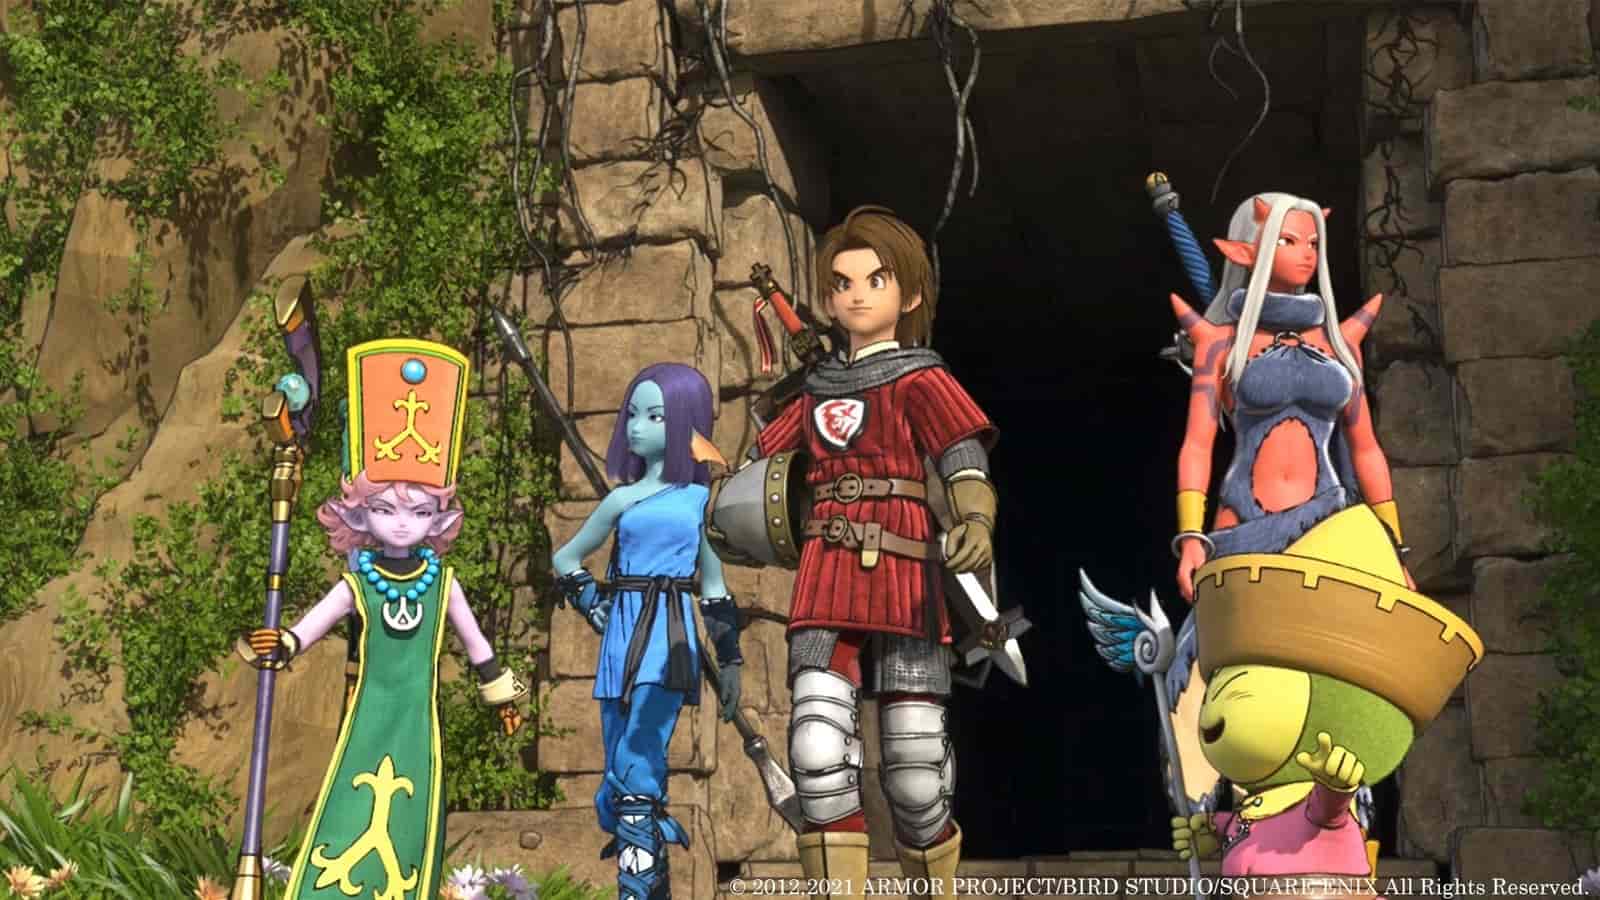 Dragon Quest X Offline, Square Enix, PS4, PS5, PlayStation 4, PlayStation 5, Nintendo Switch, Switch, release date, trailer, screenshots, pre-order now, Japan, Asia